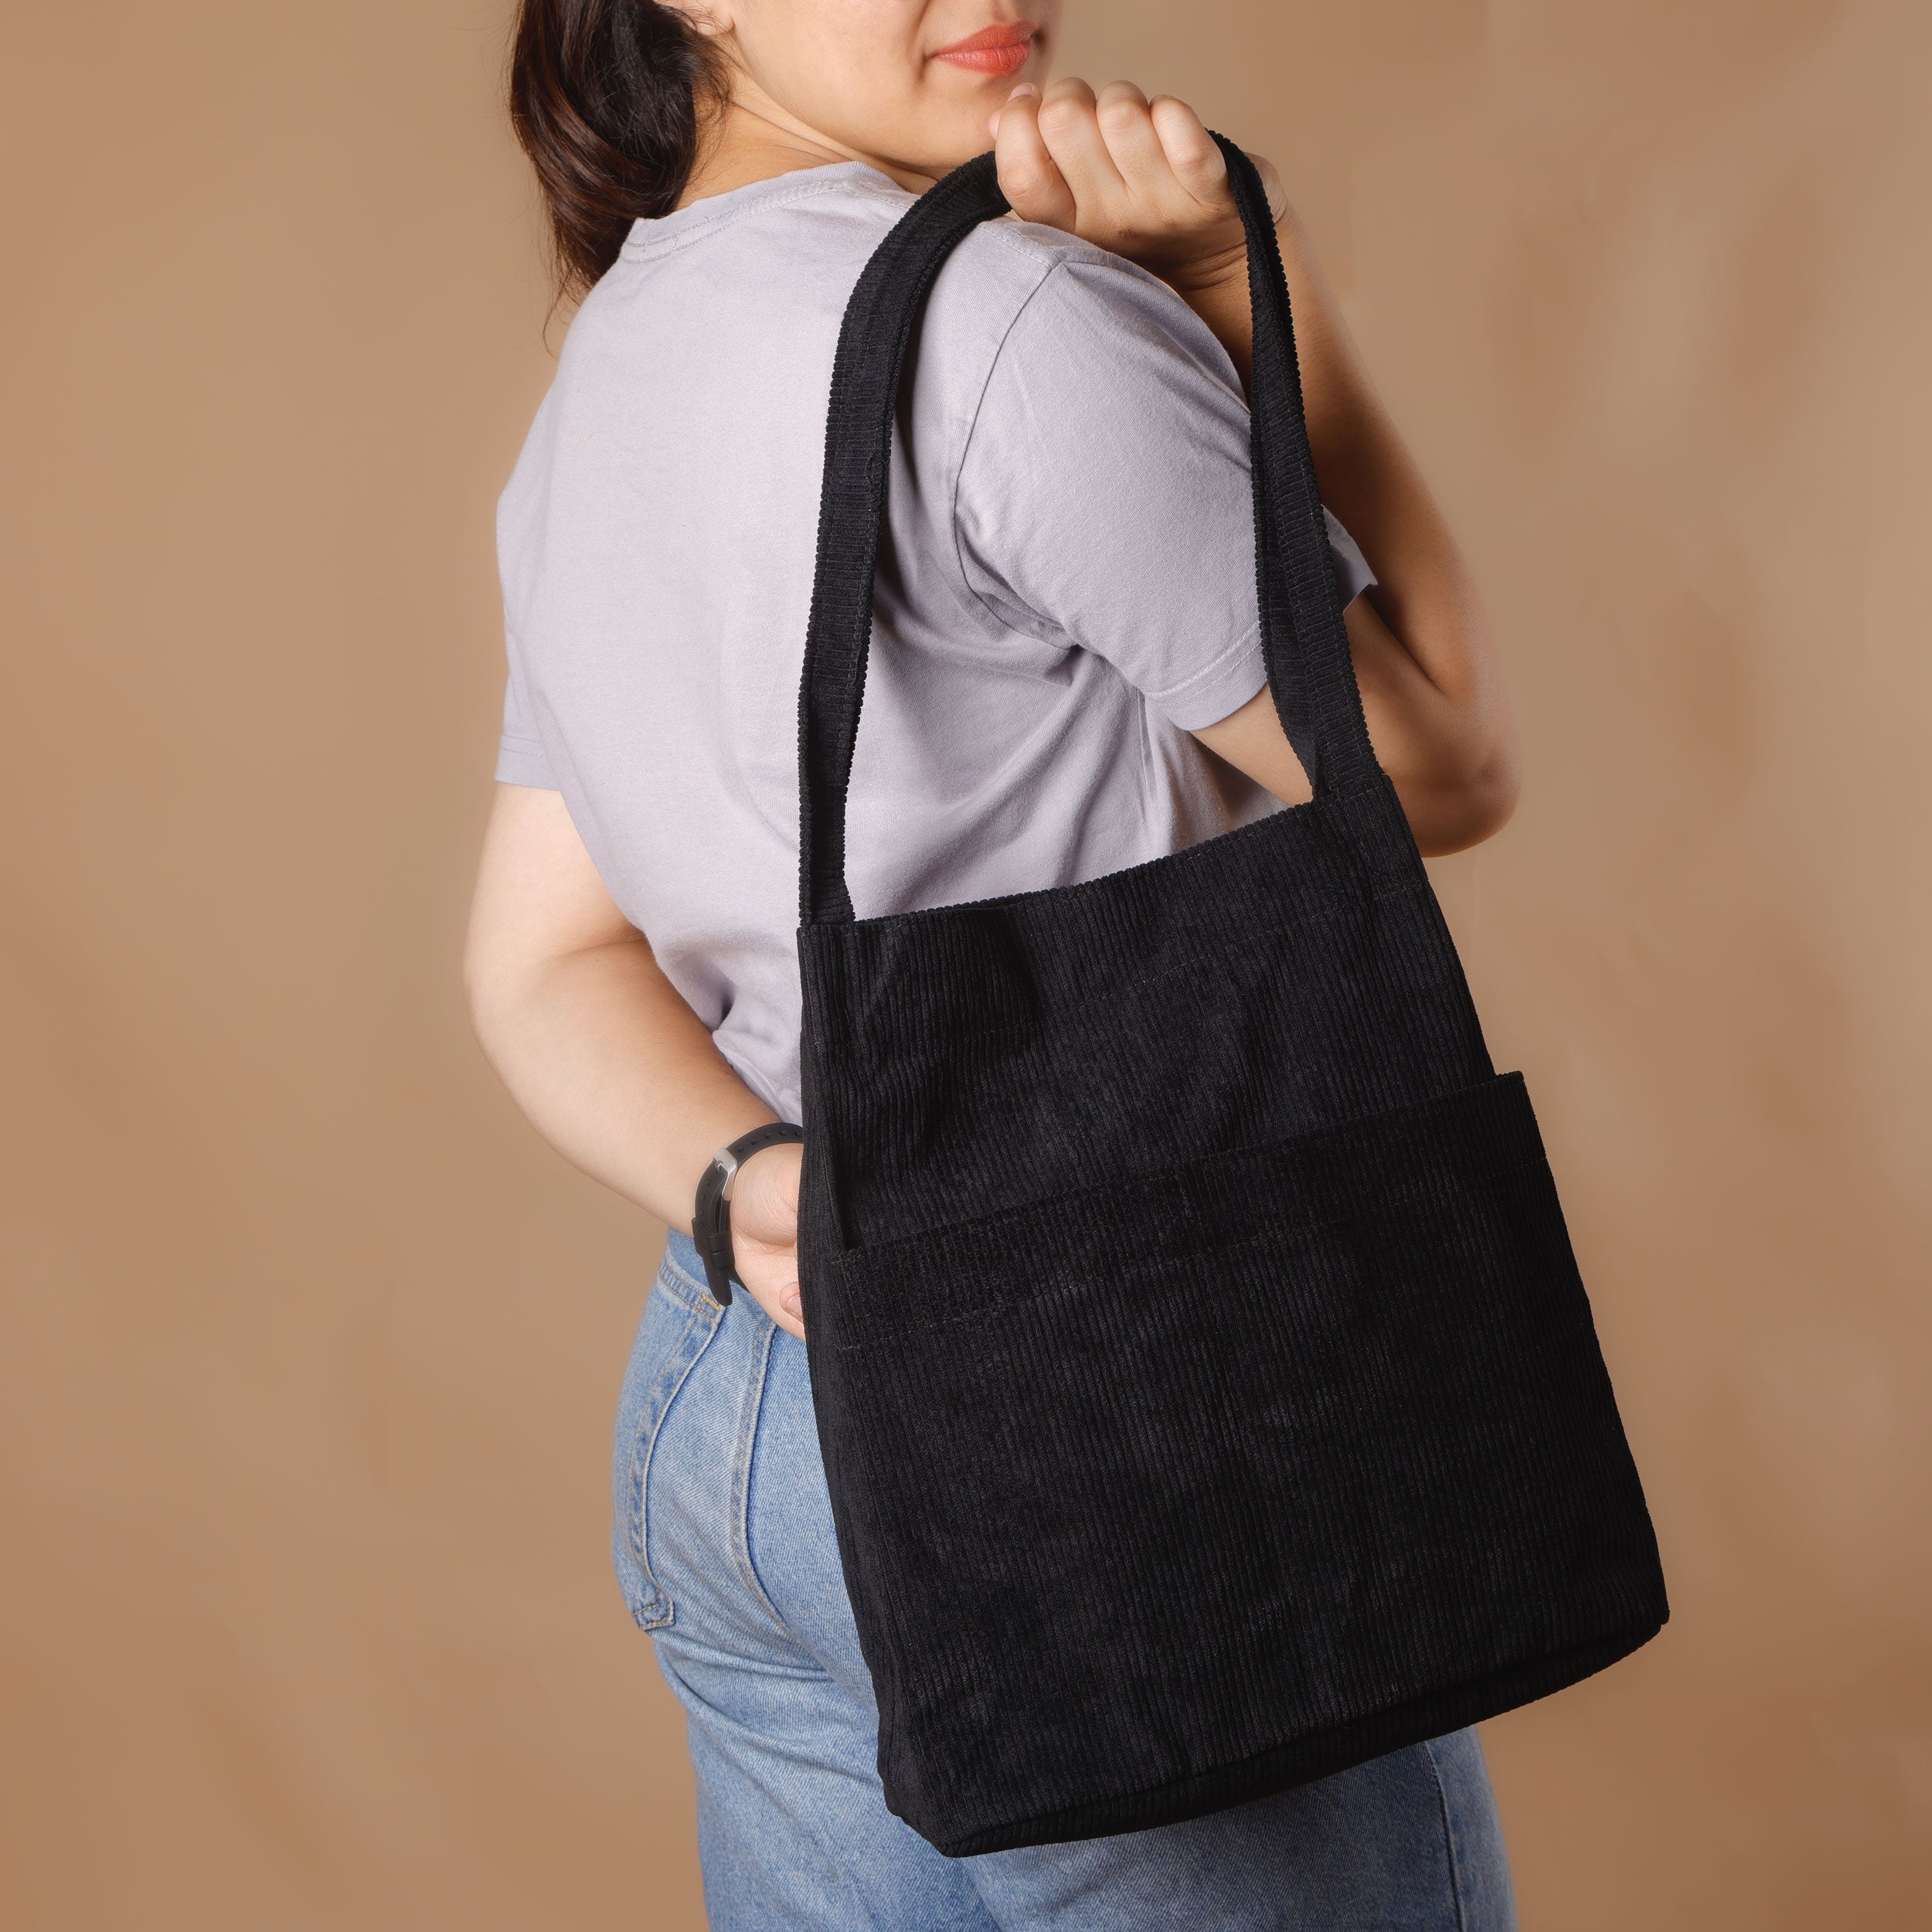 Branded Tote Bags for Women for College, Work and Daily Use – HK BASICS